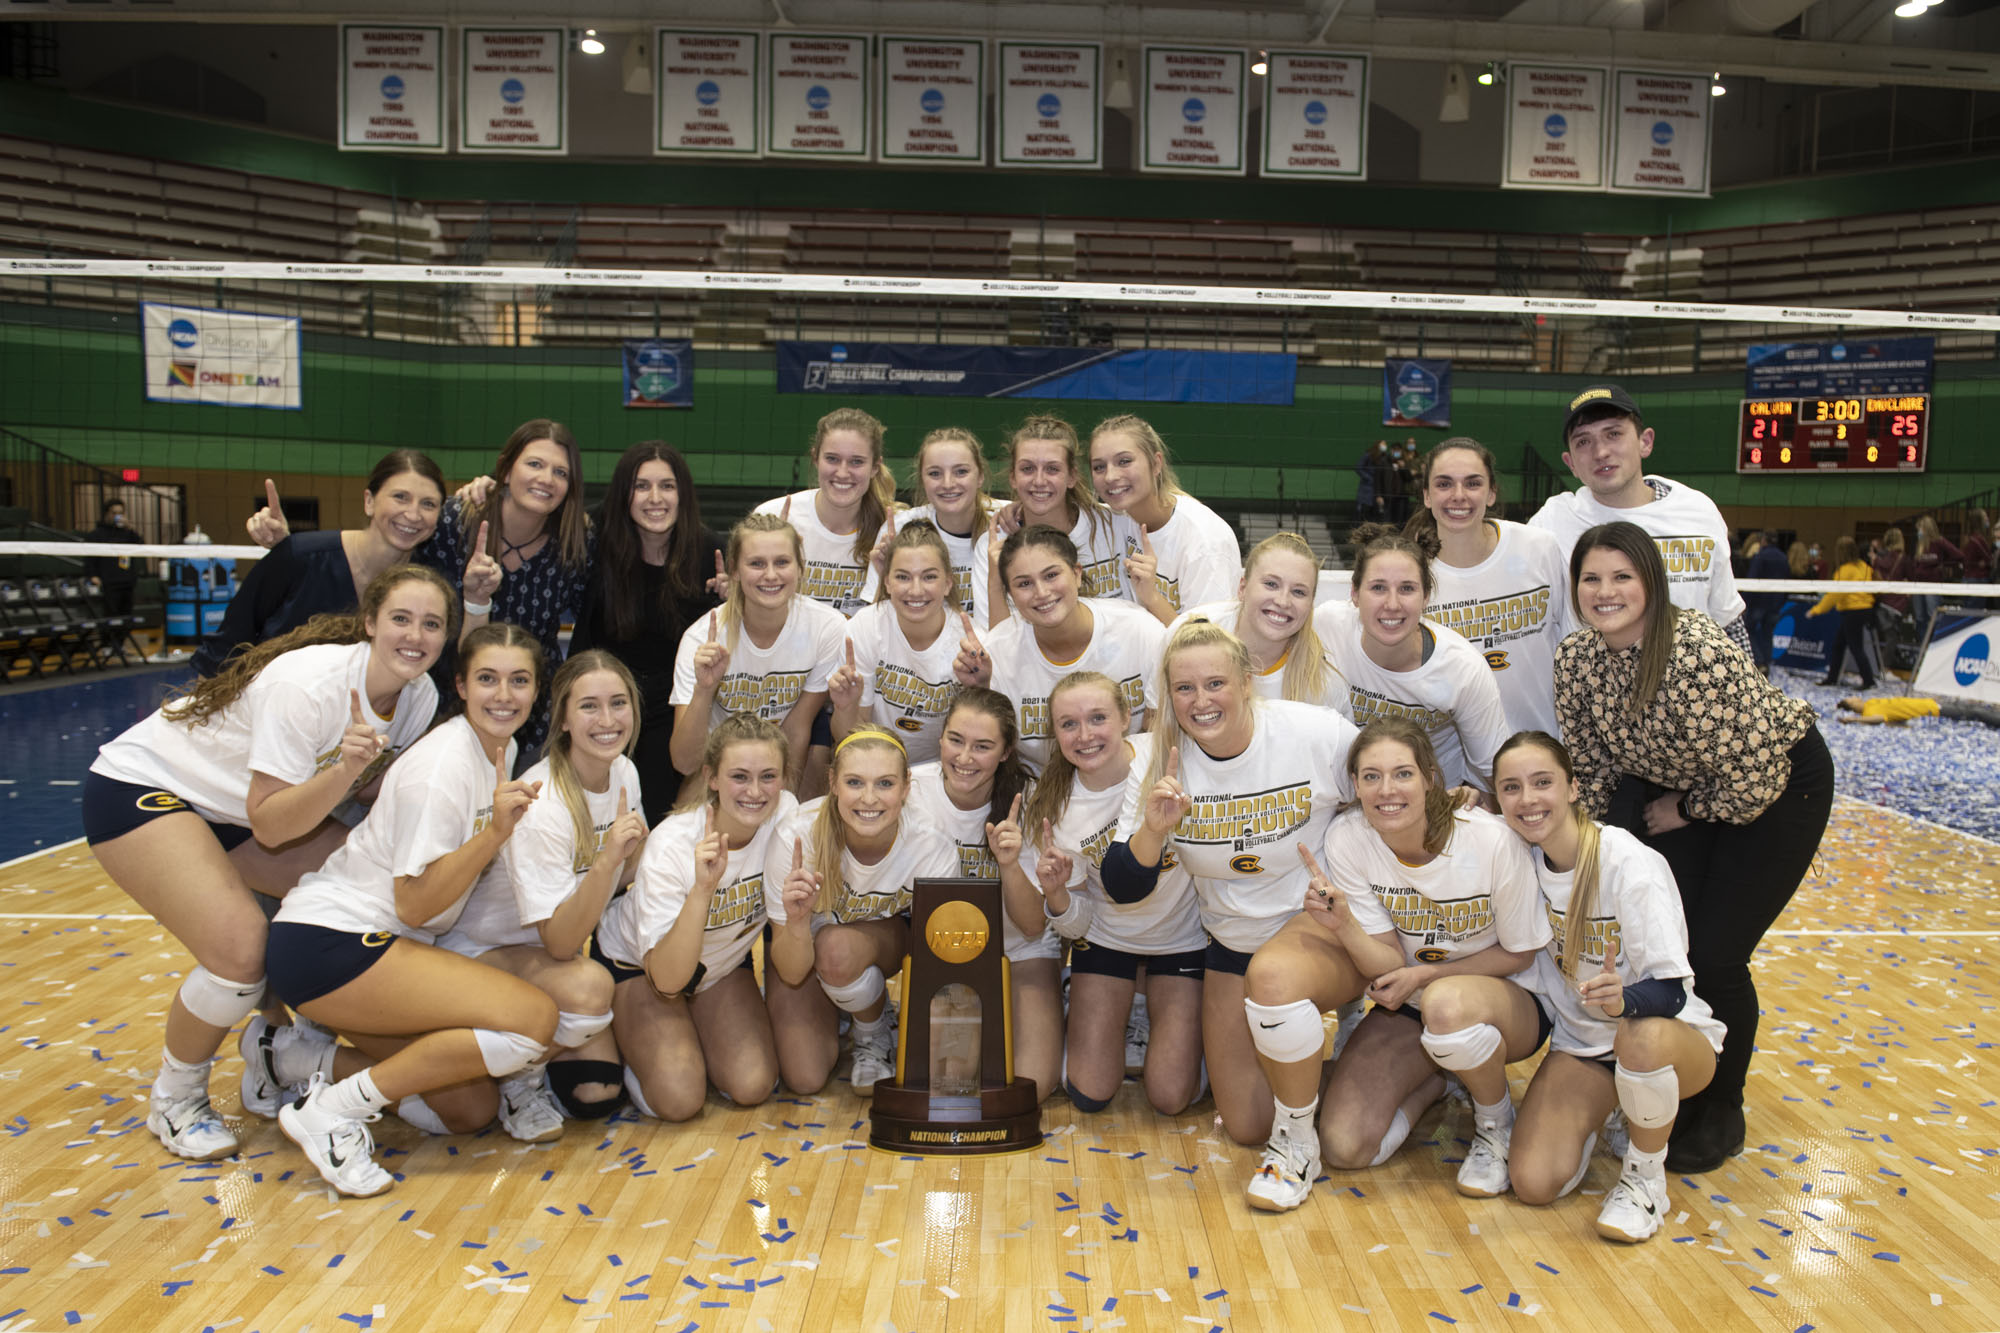 The UW-Eau Claire women's volleyball team poses with its Division III National Championship trophy